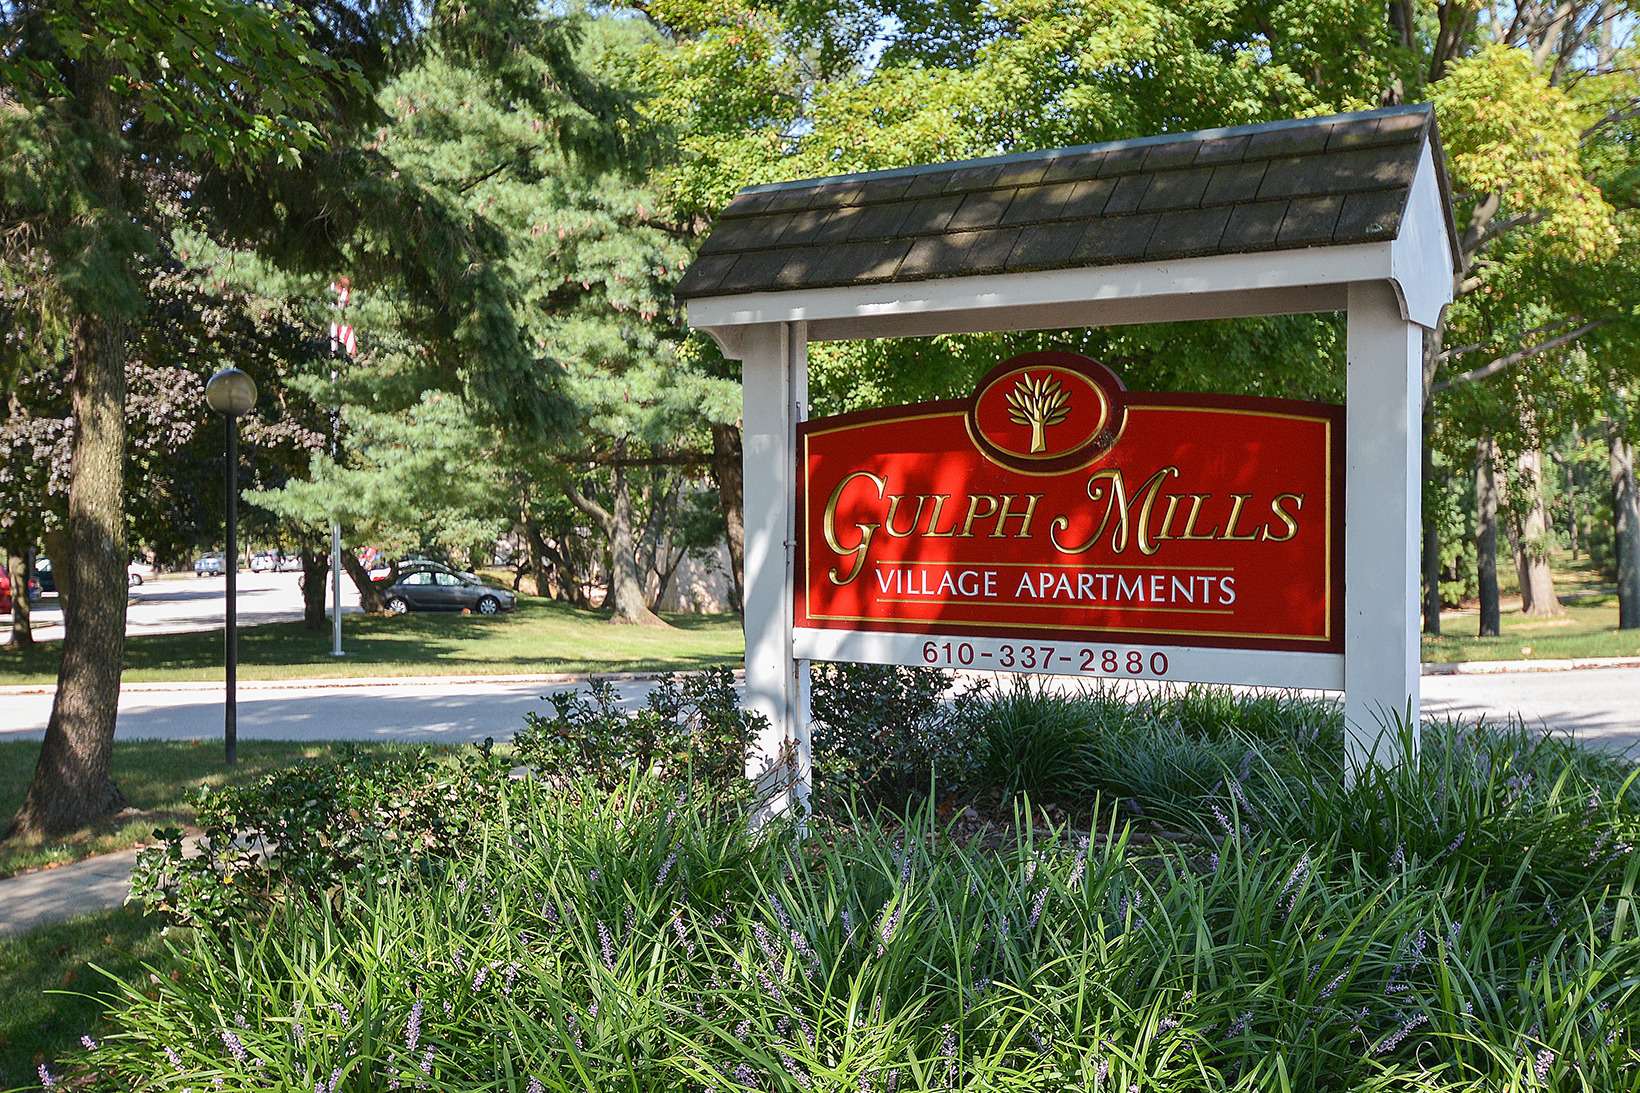 Gulph Mills Village Apartments sign on grass with trees surrounding the sign in King of Prussia, PA.